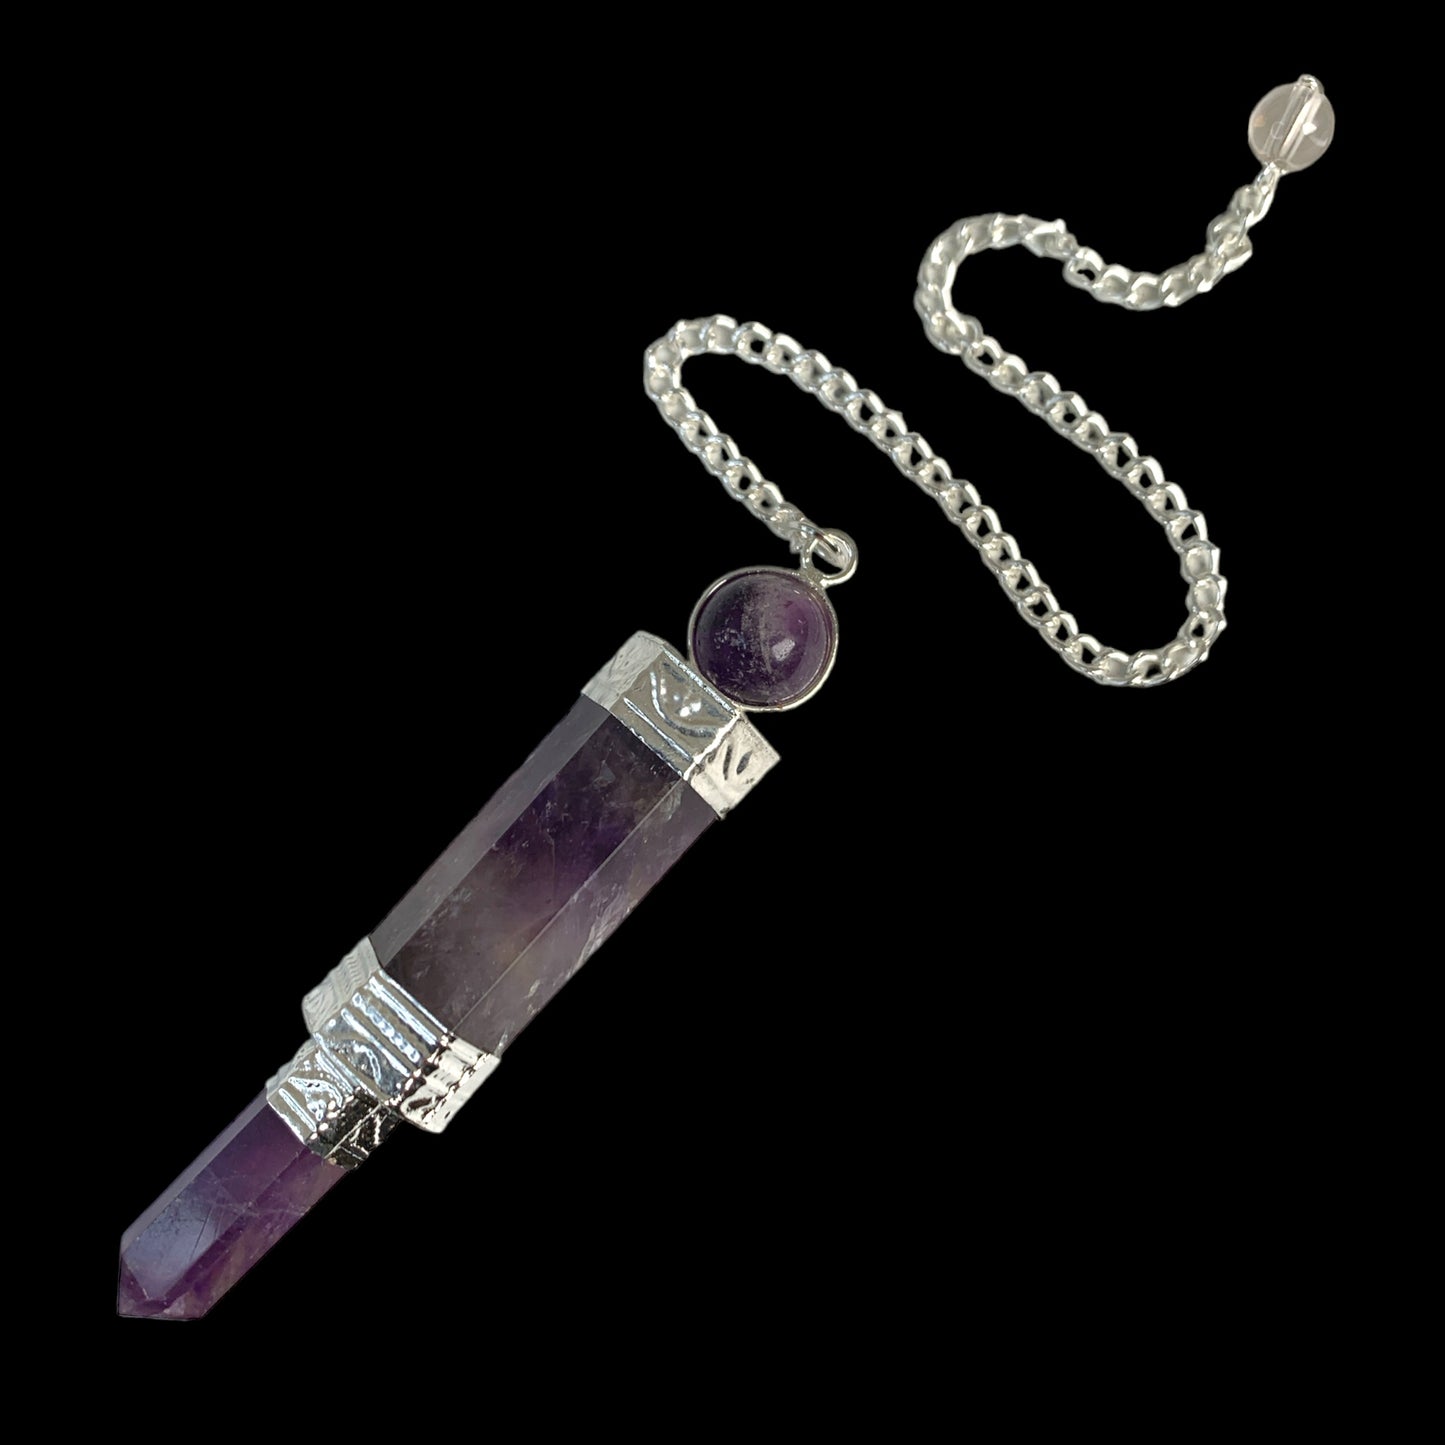 Amethyst 3pc Small Wand Pendulum with Chain - 40-50mm - 25g - NEW422